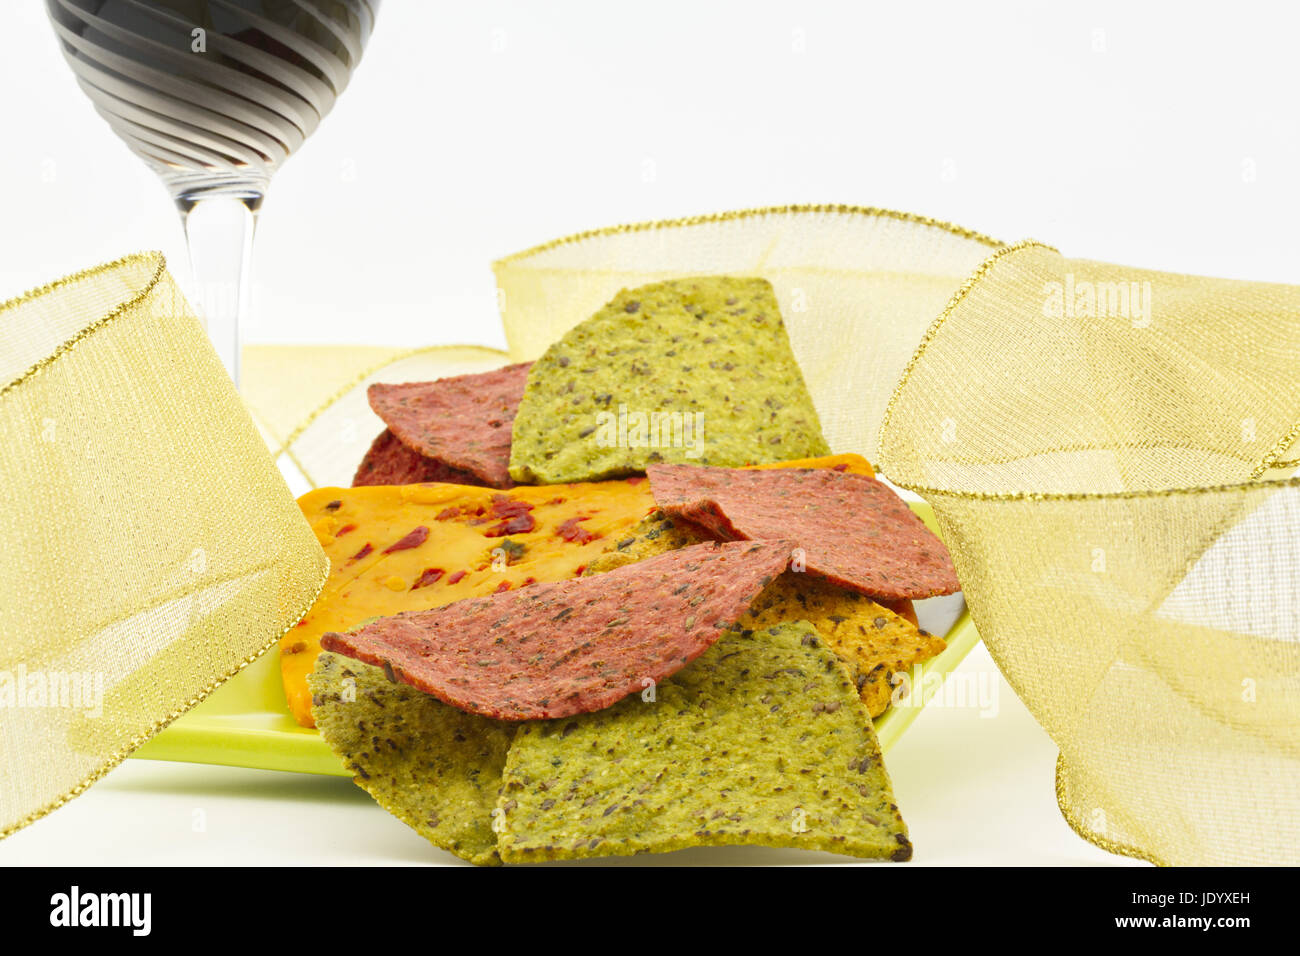 Red wine glass and simple gold ribbon in festive image of party snack foods of cheese with chili and pepper and healthy tortilla chips in green and re Stock Photo